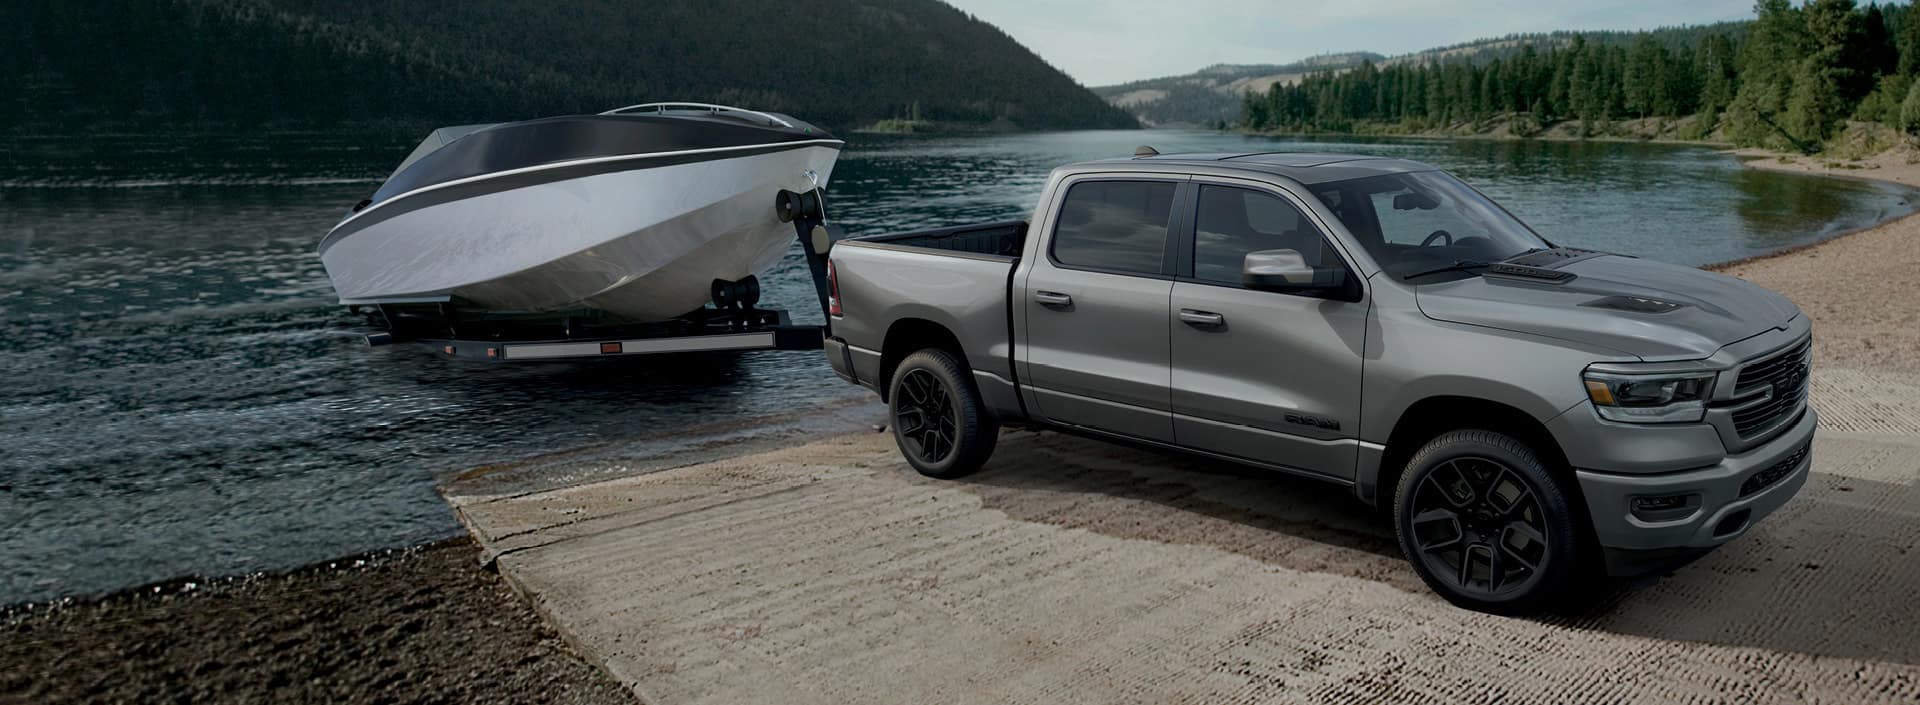 Dodge truck towing a boat out of the water